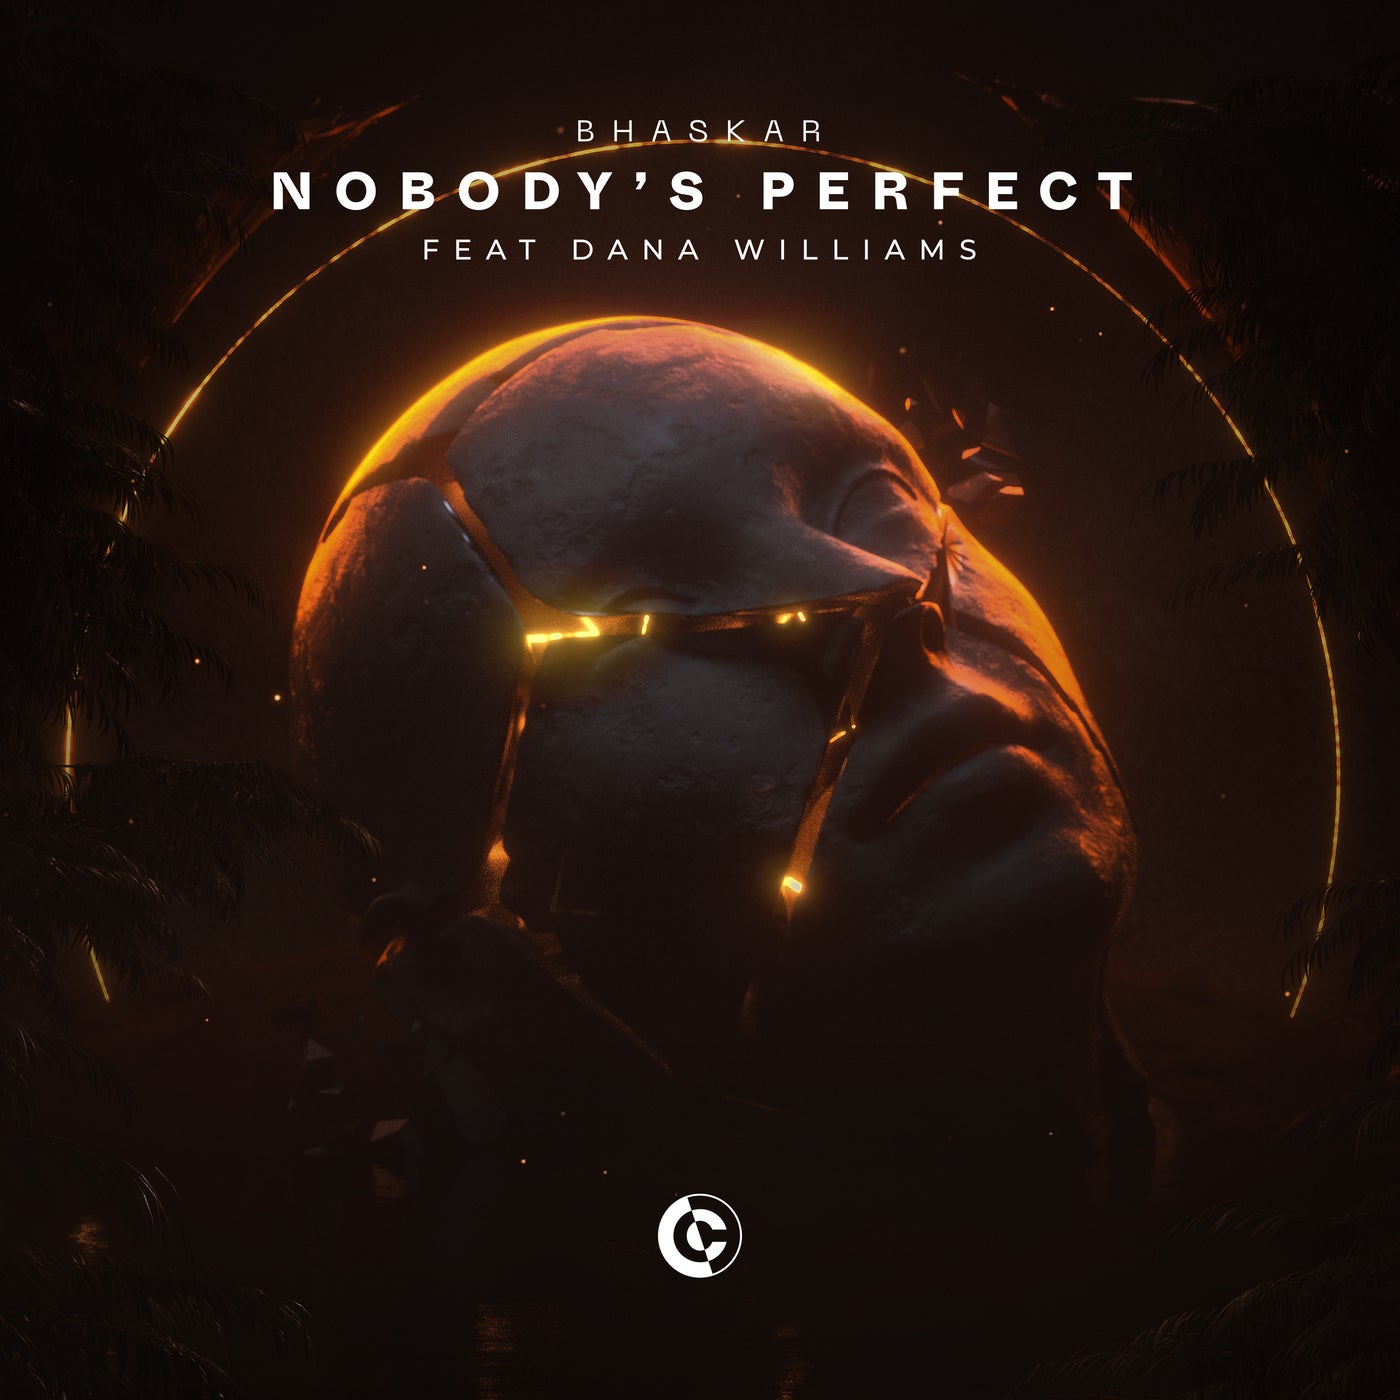 image cover: Bhaskar, Dana Williams - Nobody's Perfect (feat. Dana Williams) [Extended Mix] on CONTROVERSIA